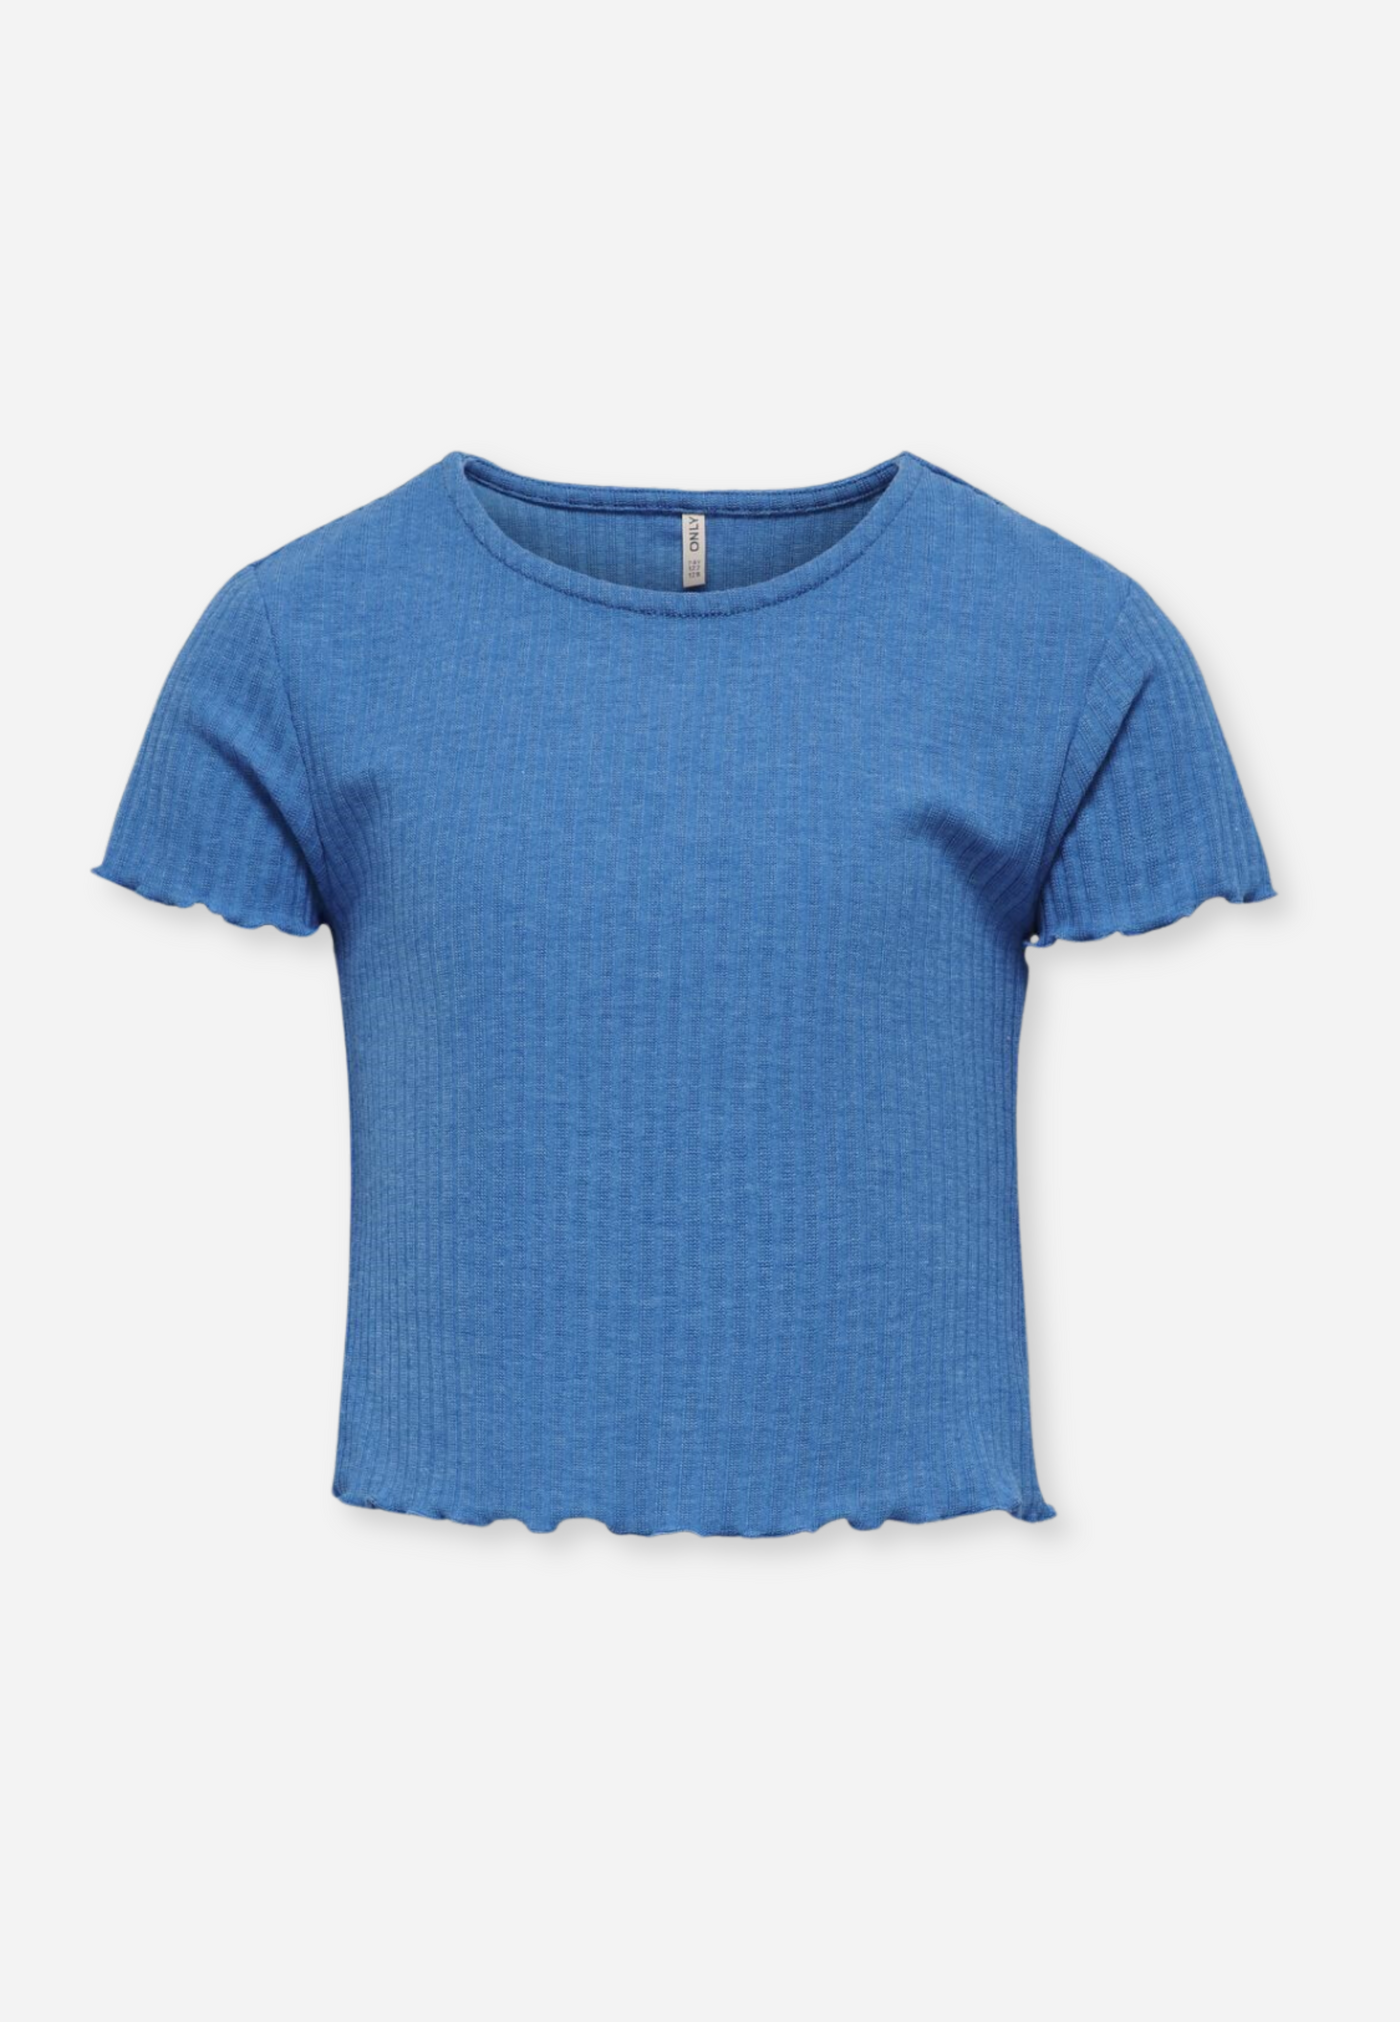 KOGNELLA S/S O-NECK TOP - FRENCH BLUE